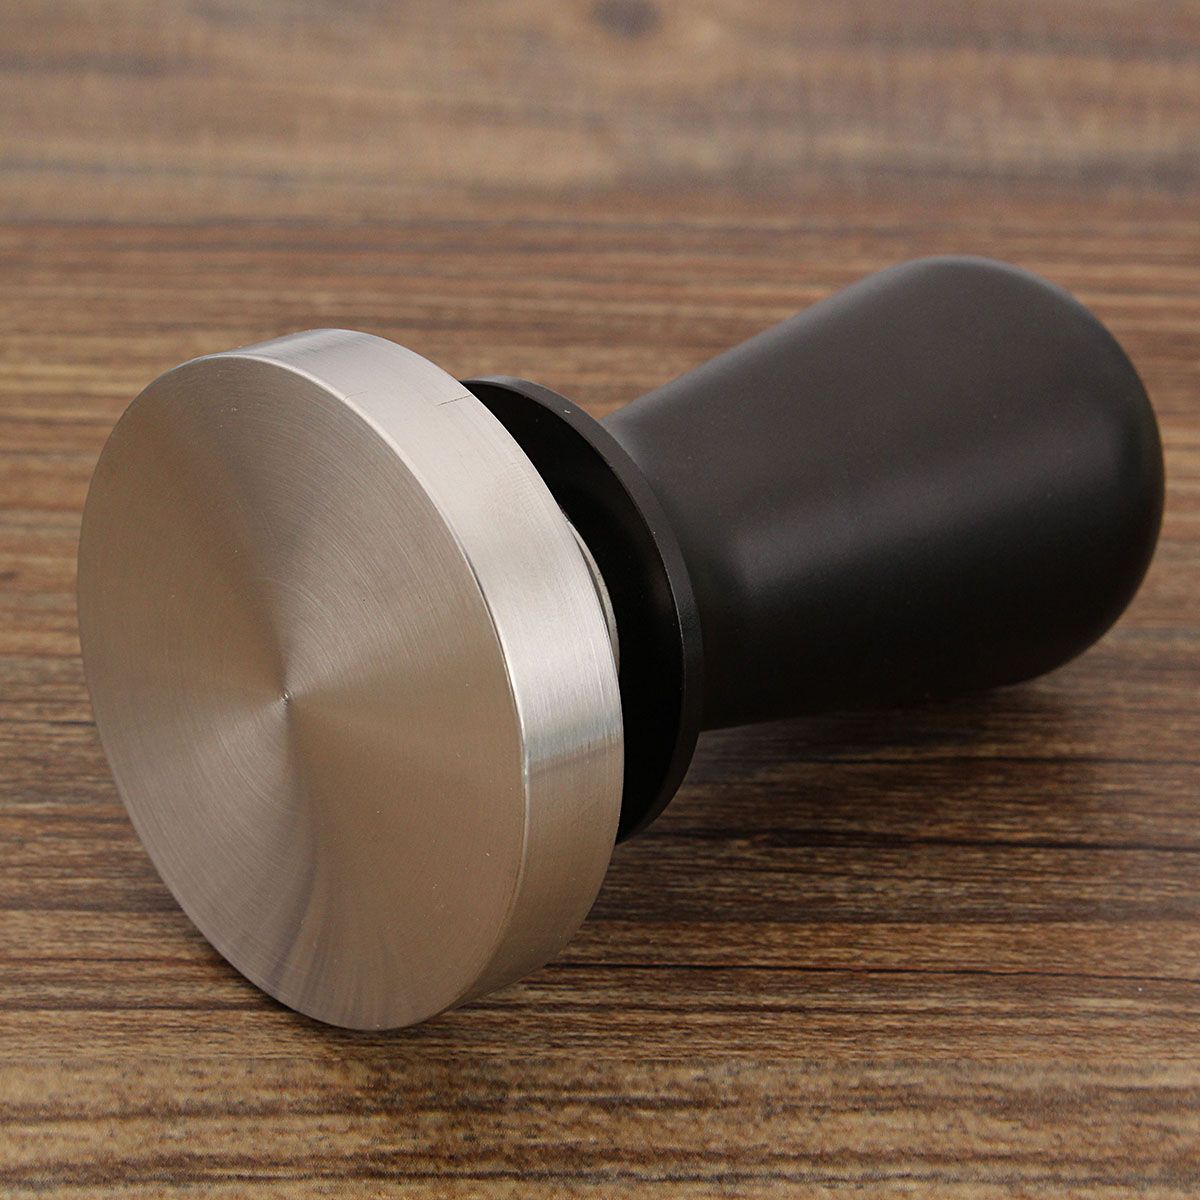 58mm-Stainless-Steel-Coffee-Tamper-Calibrated-Pressure-Coffee-Bean-Press-Flat-Base-for-Espresso-1169544